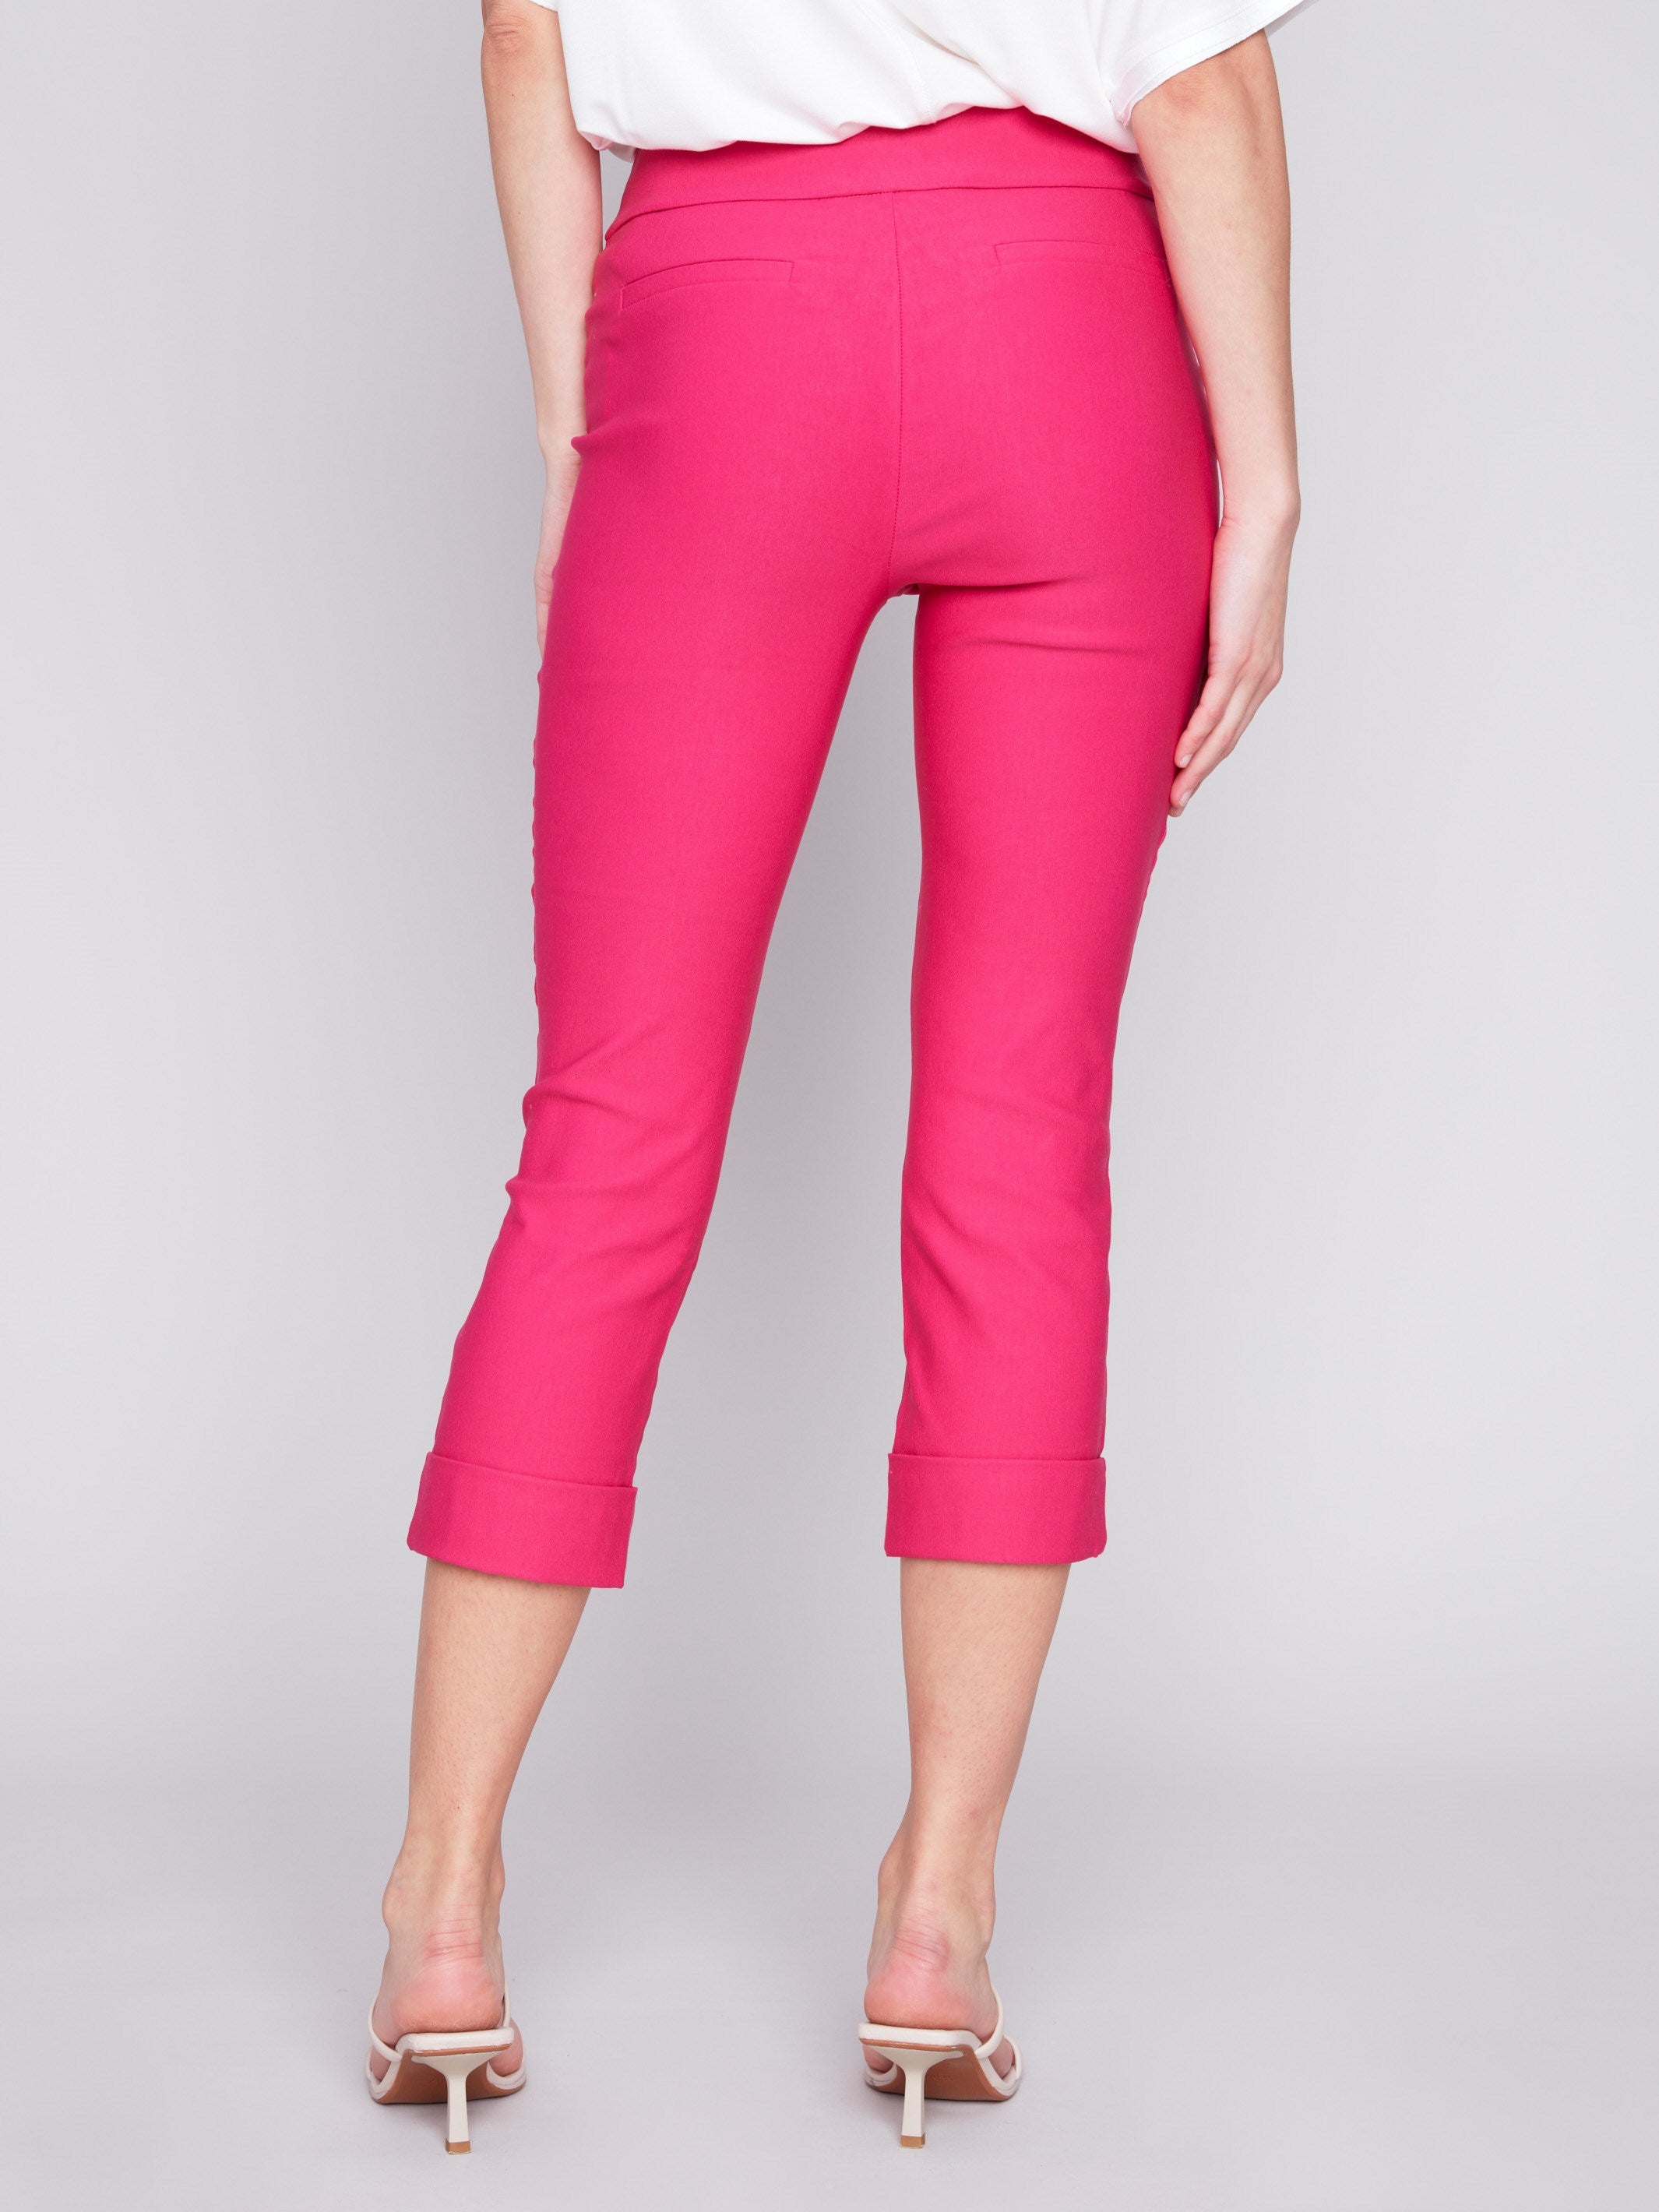 Stretch Pull-On Capri Pants - Punch - Charlie B Collection Canada - Image 3